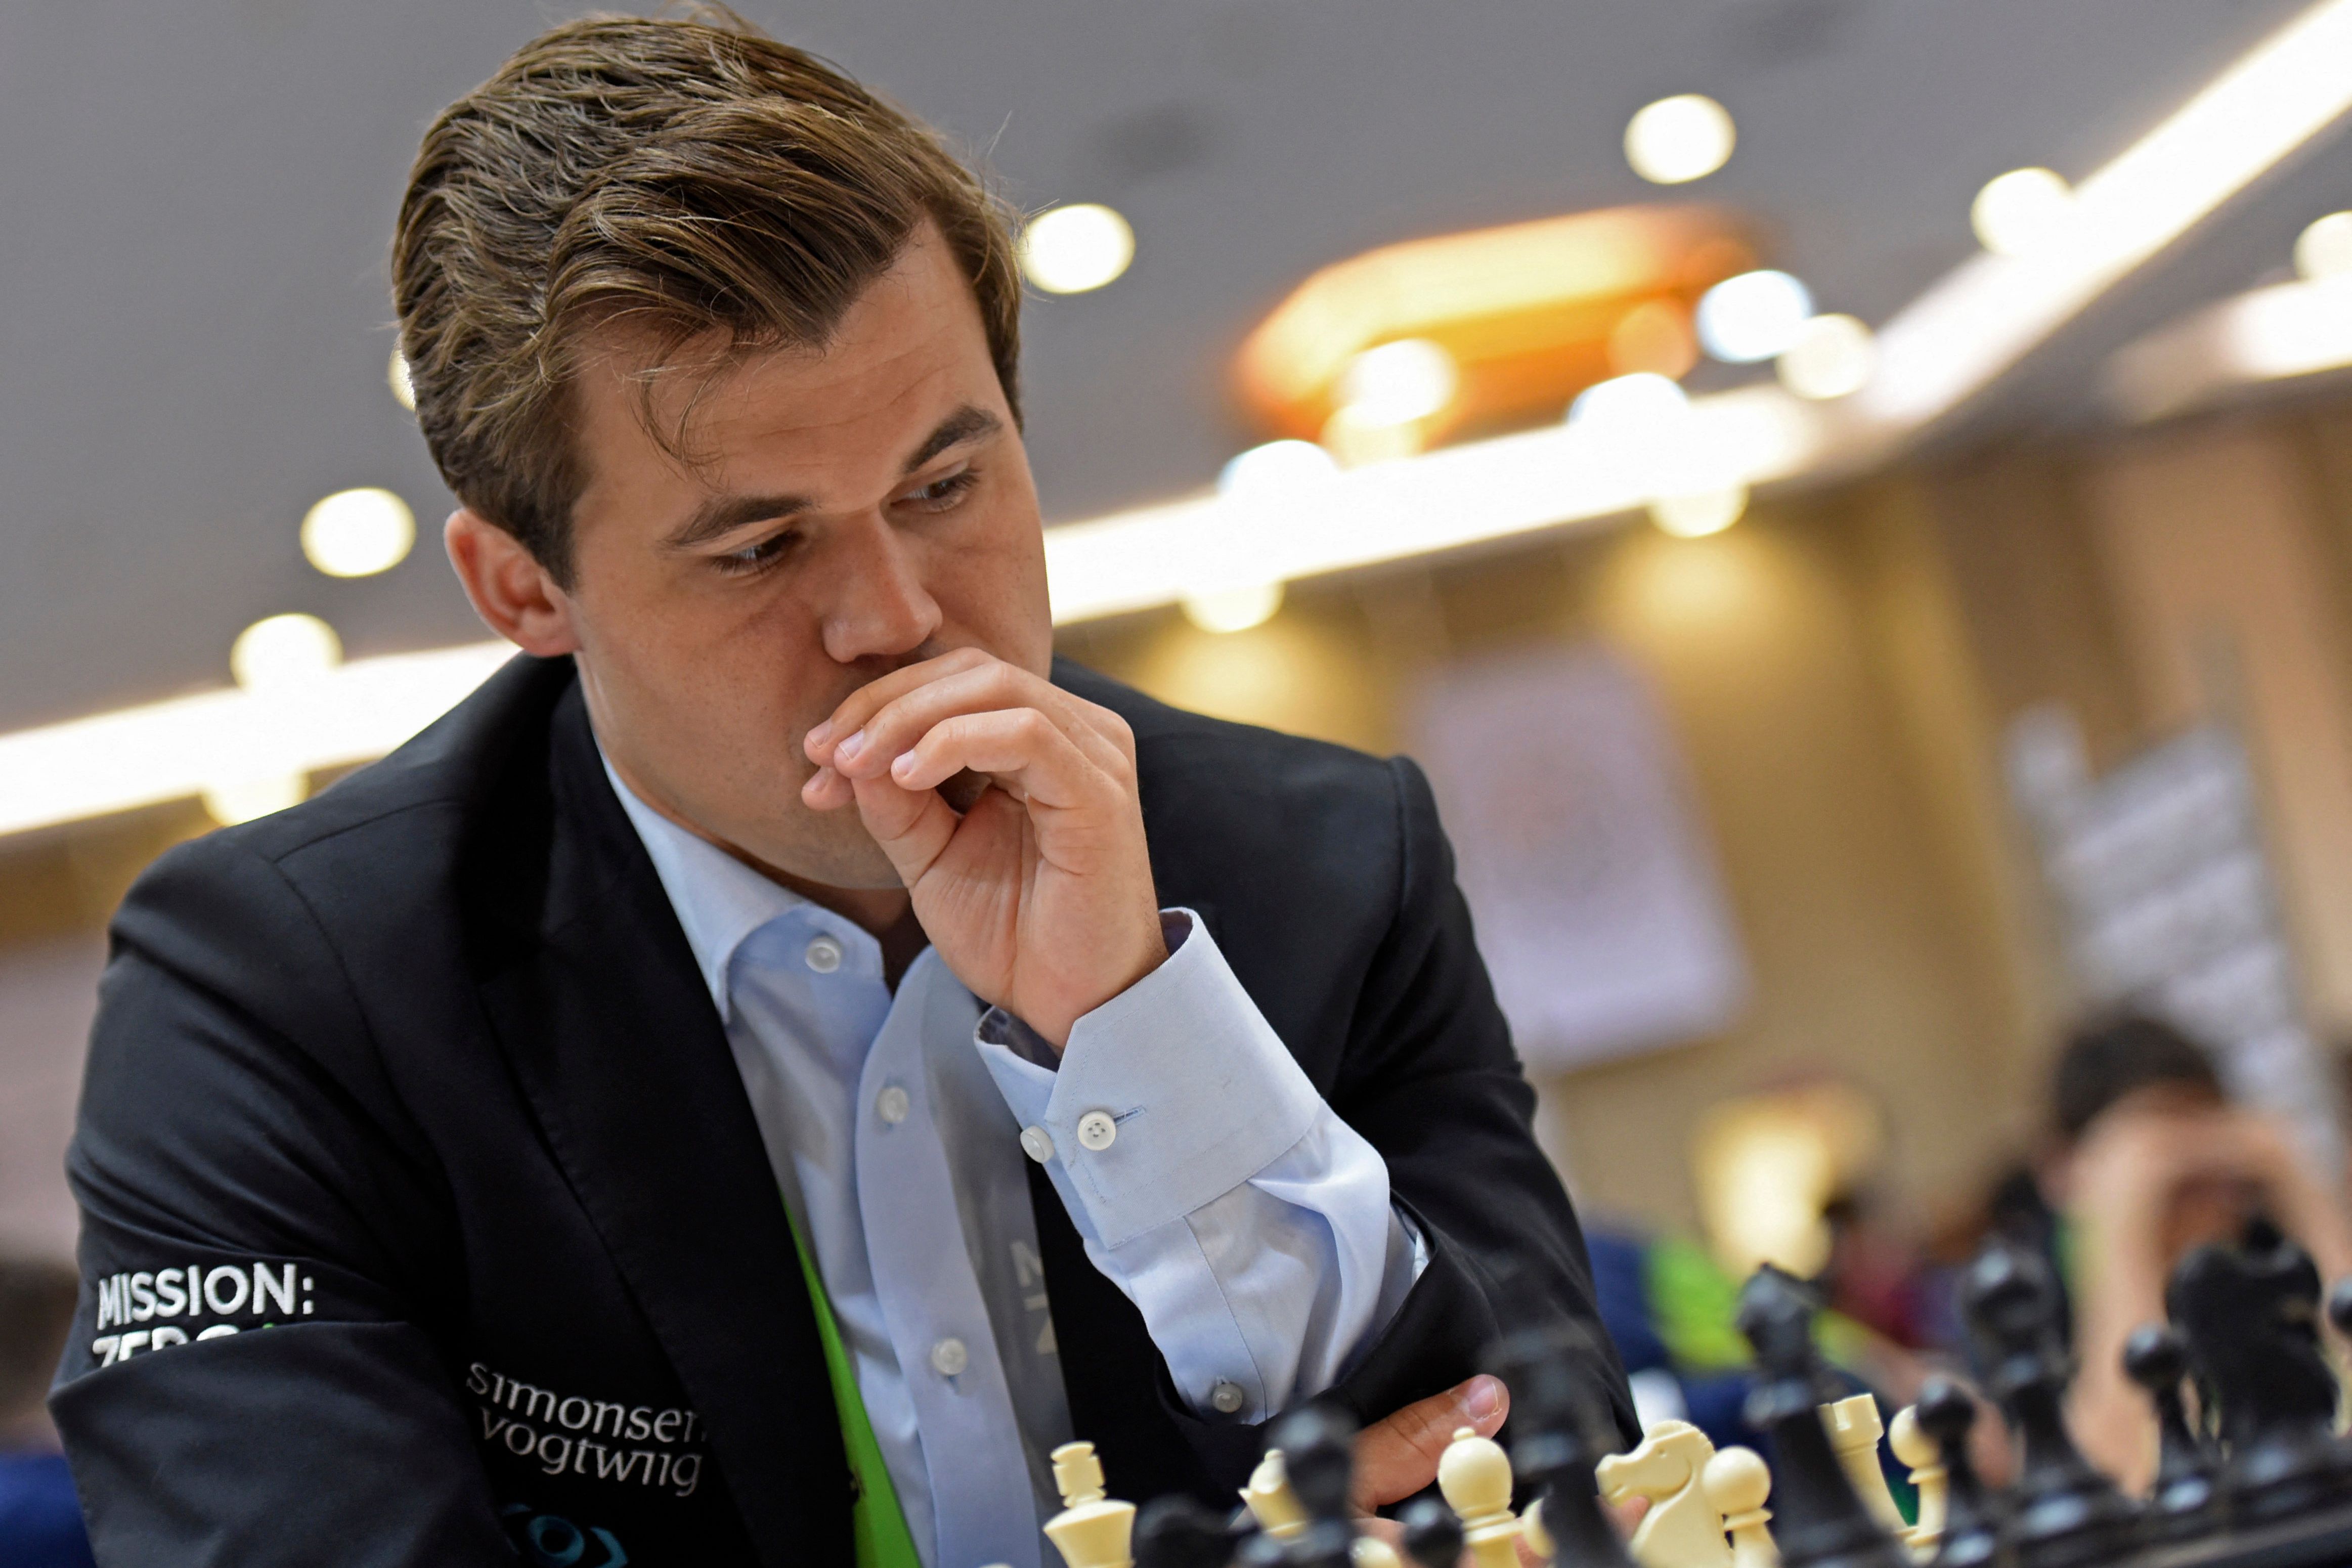 Magnus Carlsen resigns from rematch with Hans Niemann after